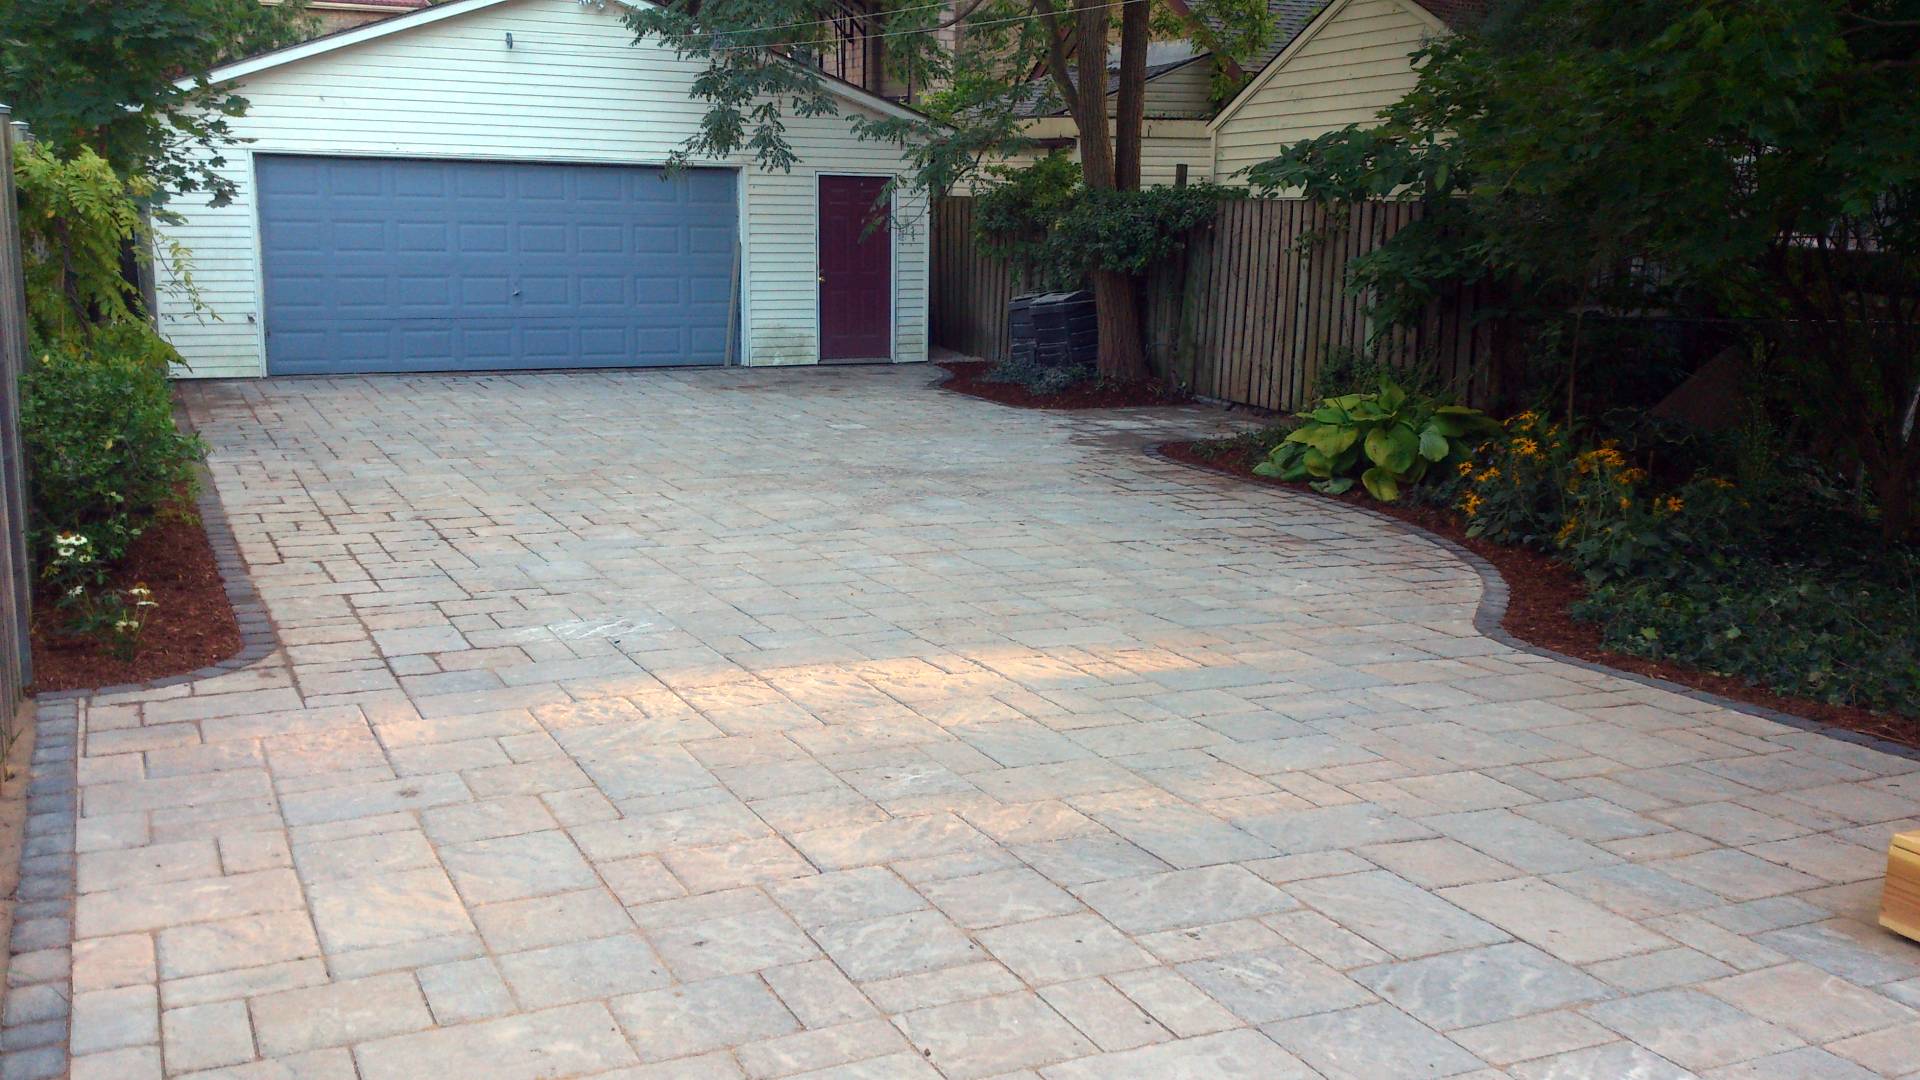 Interlock driveway installation: a landscaping / hardscaping project in London Ontario.